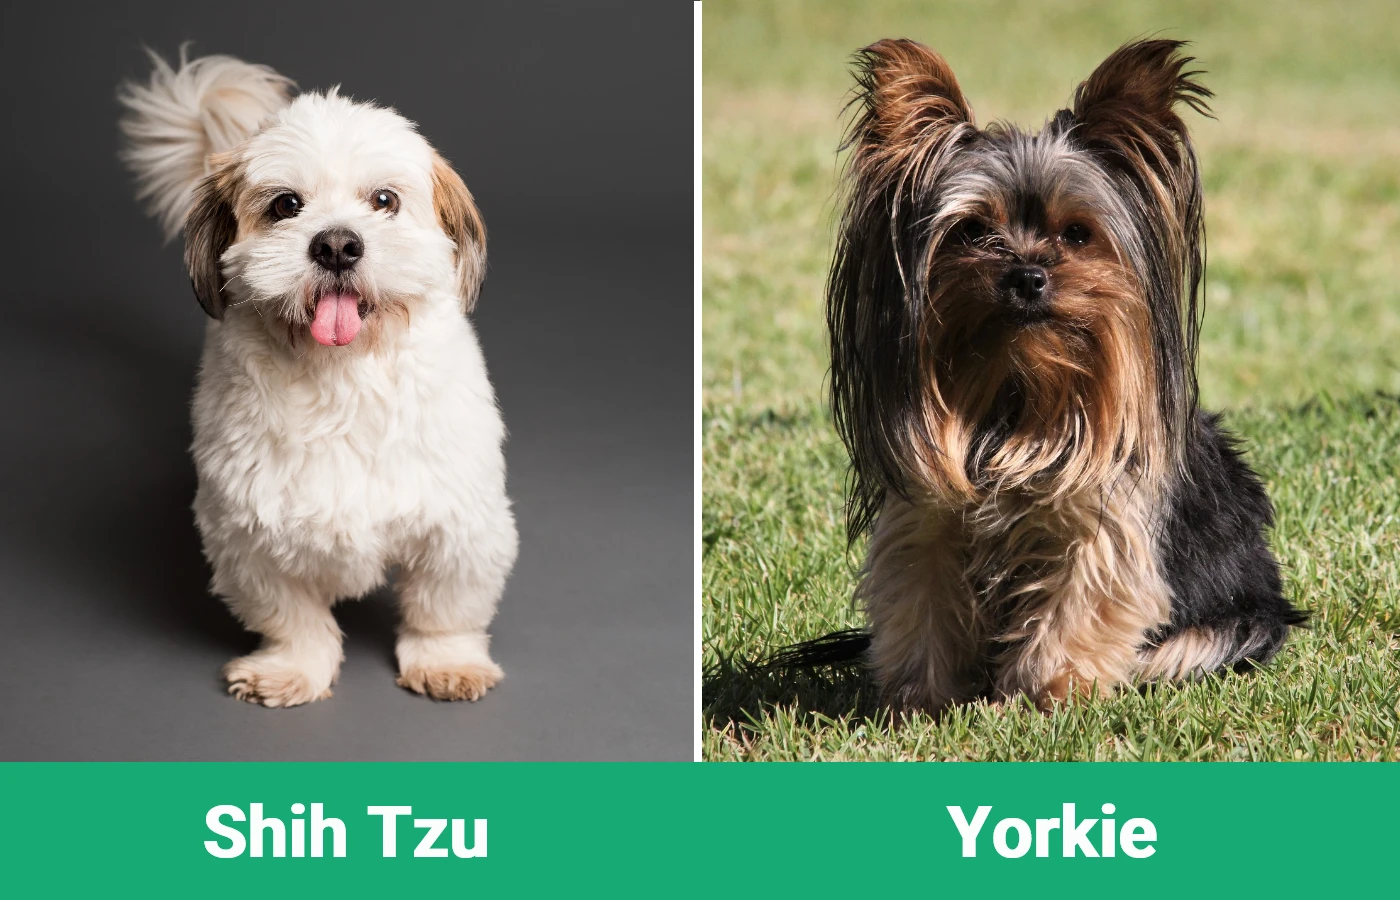 Shih Tzu vs Yorkie or Yorkshire Terrier - Visual Differences